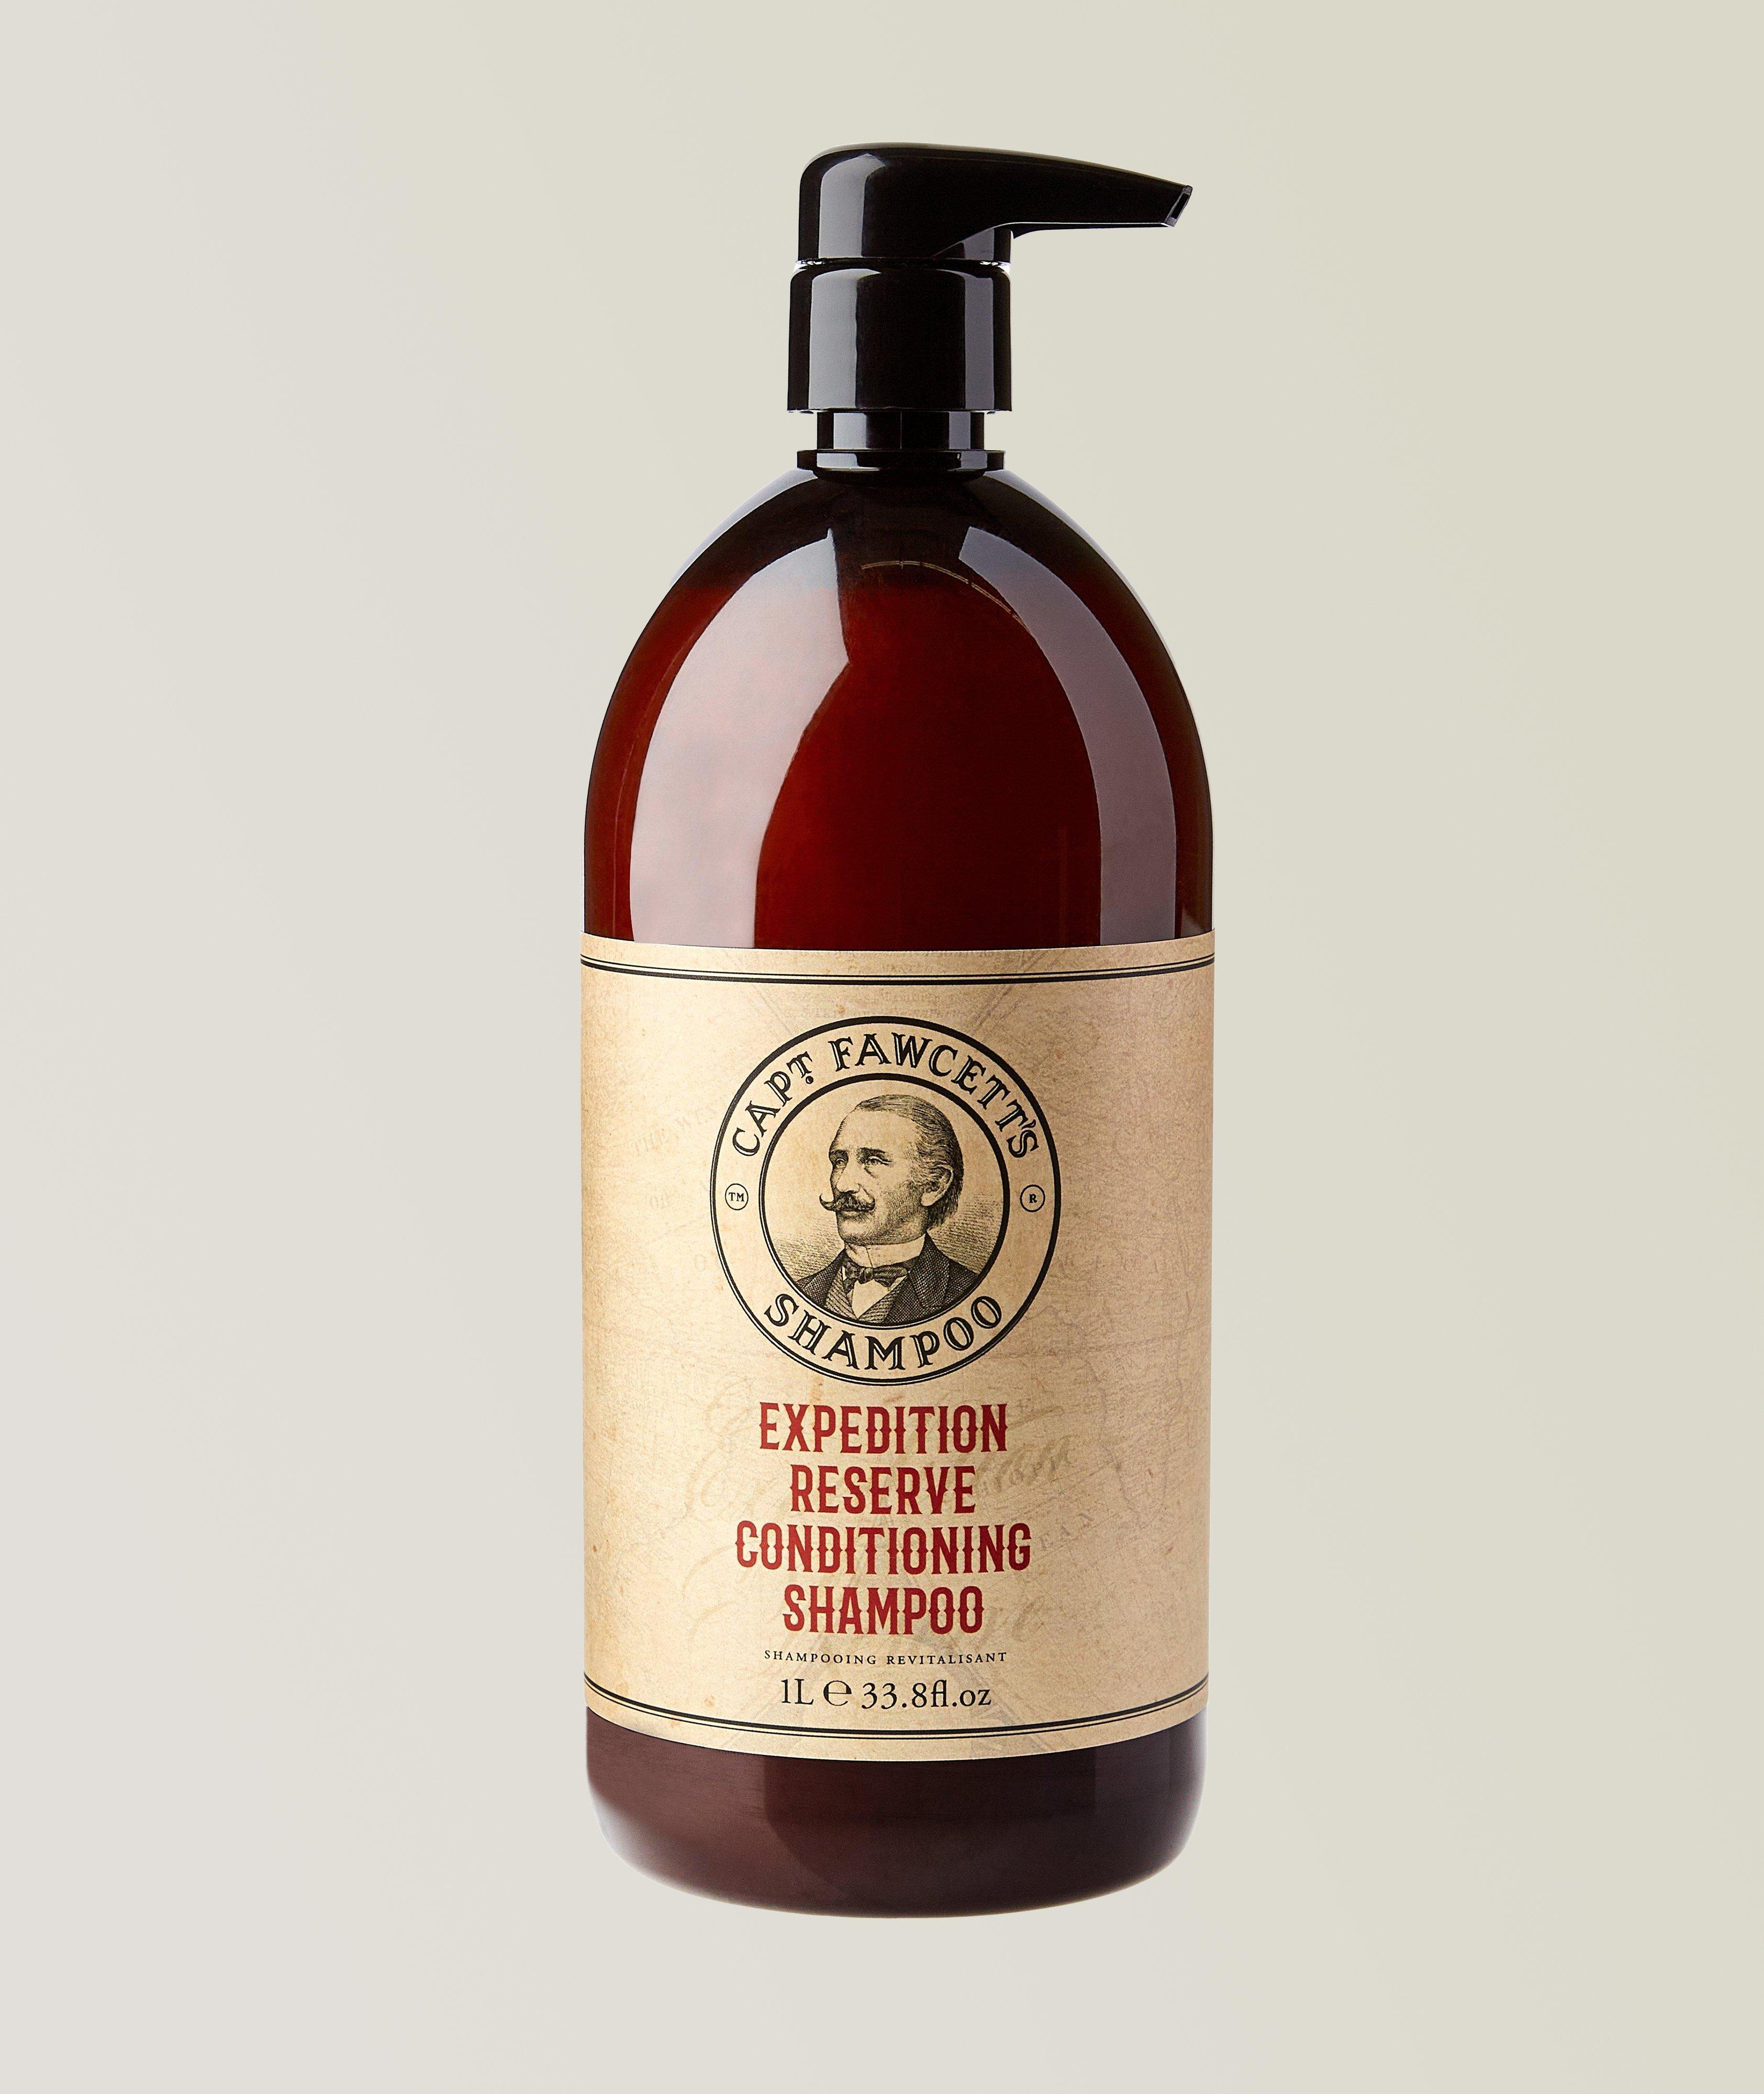 Expedition Reserve Shampoo, 1L image 0